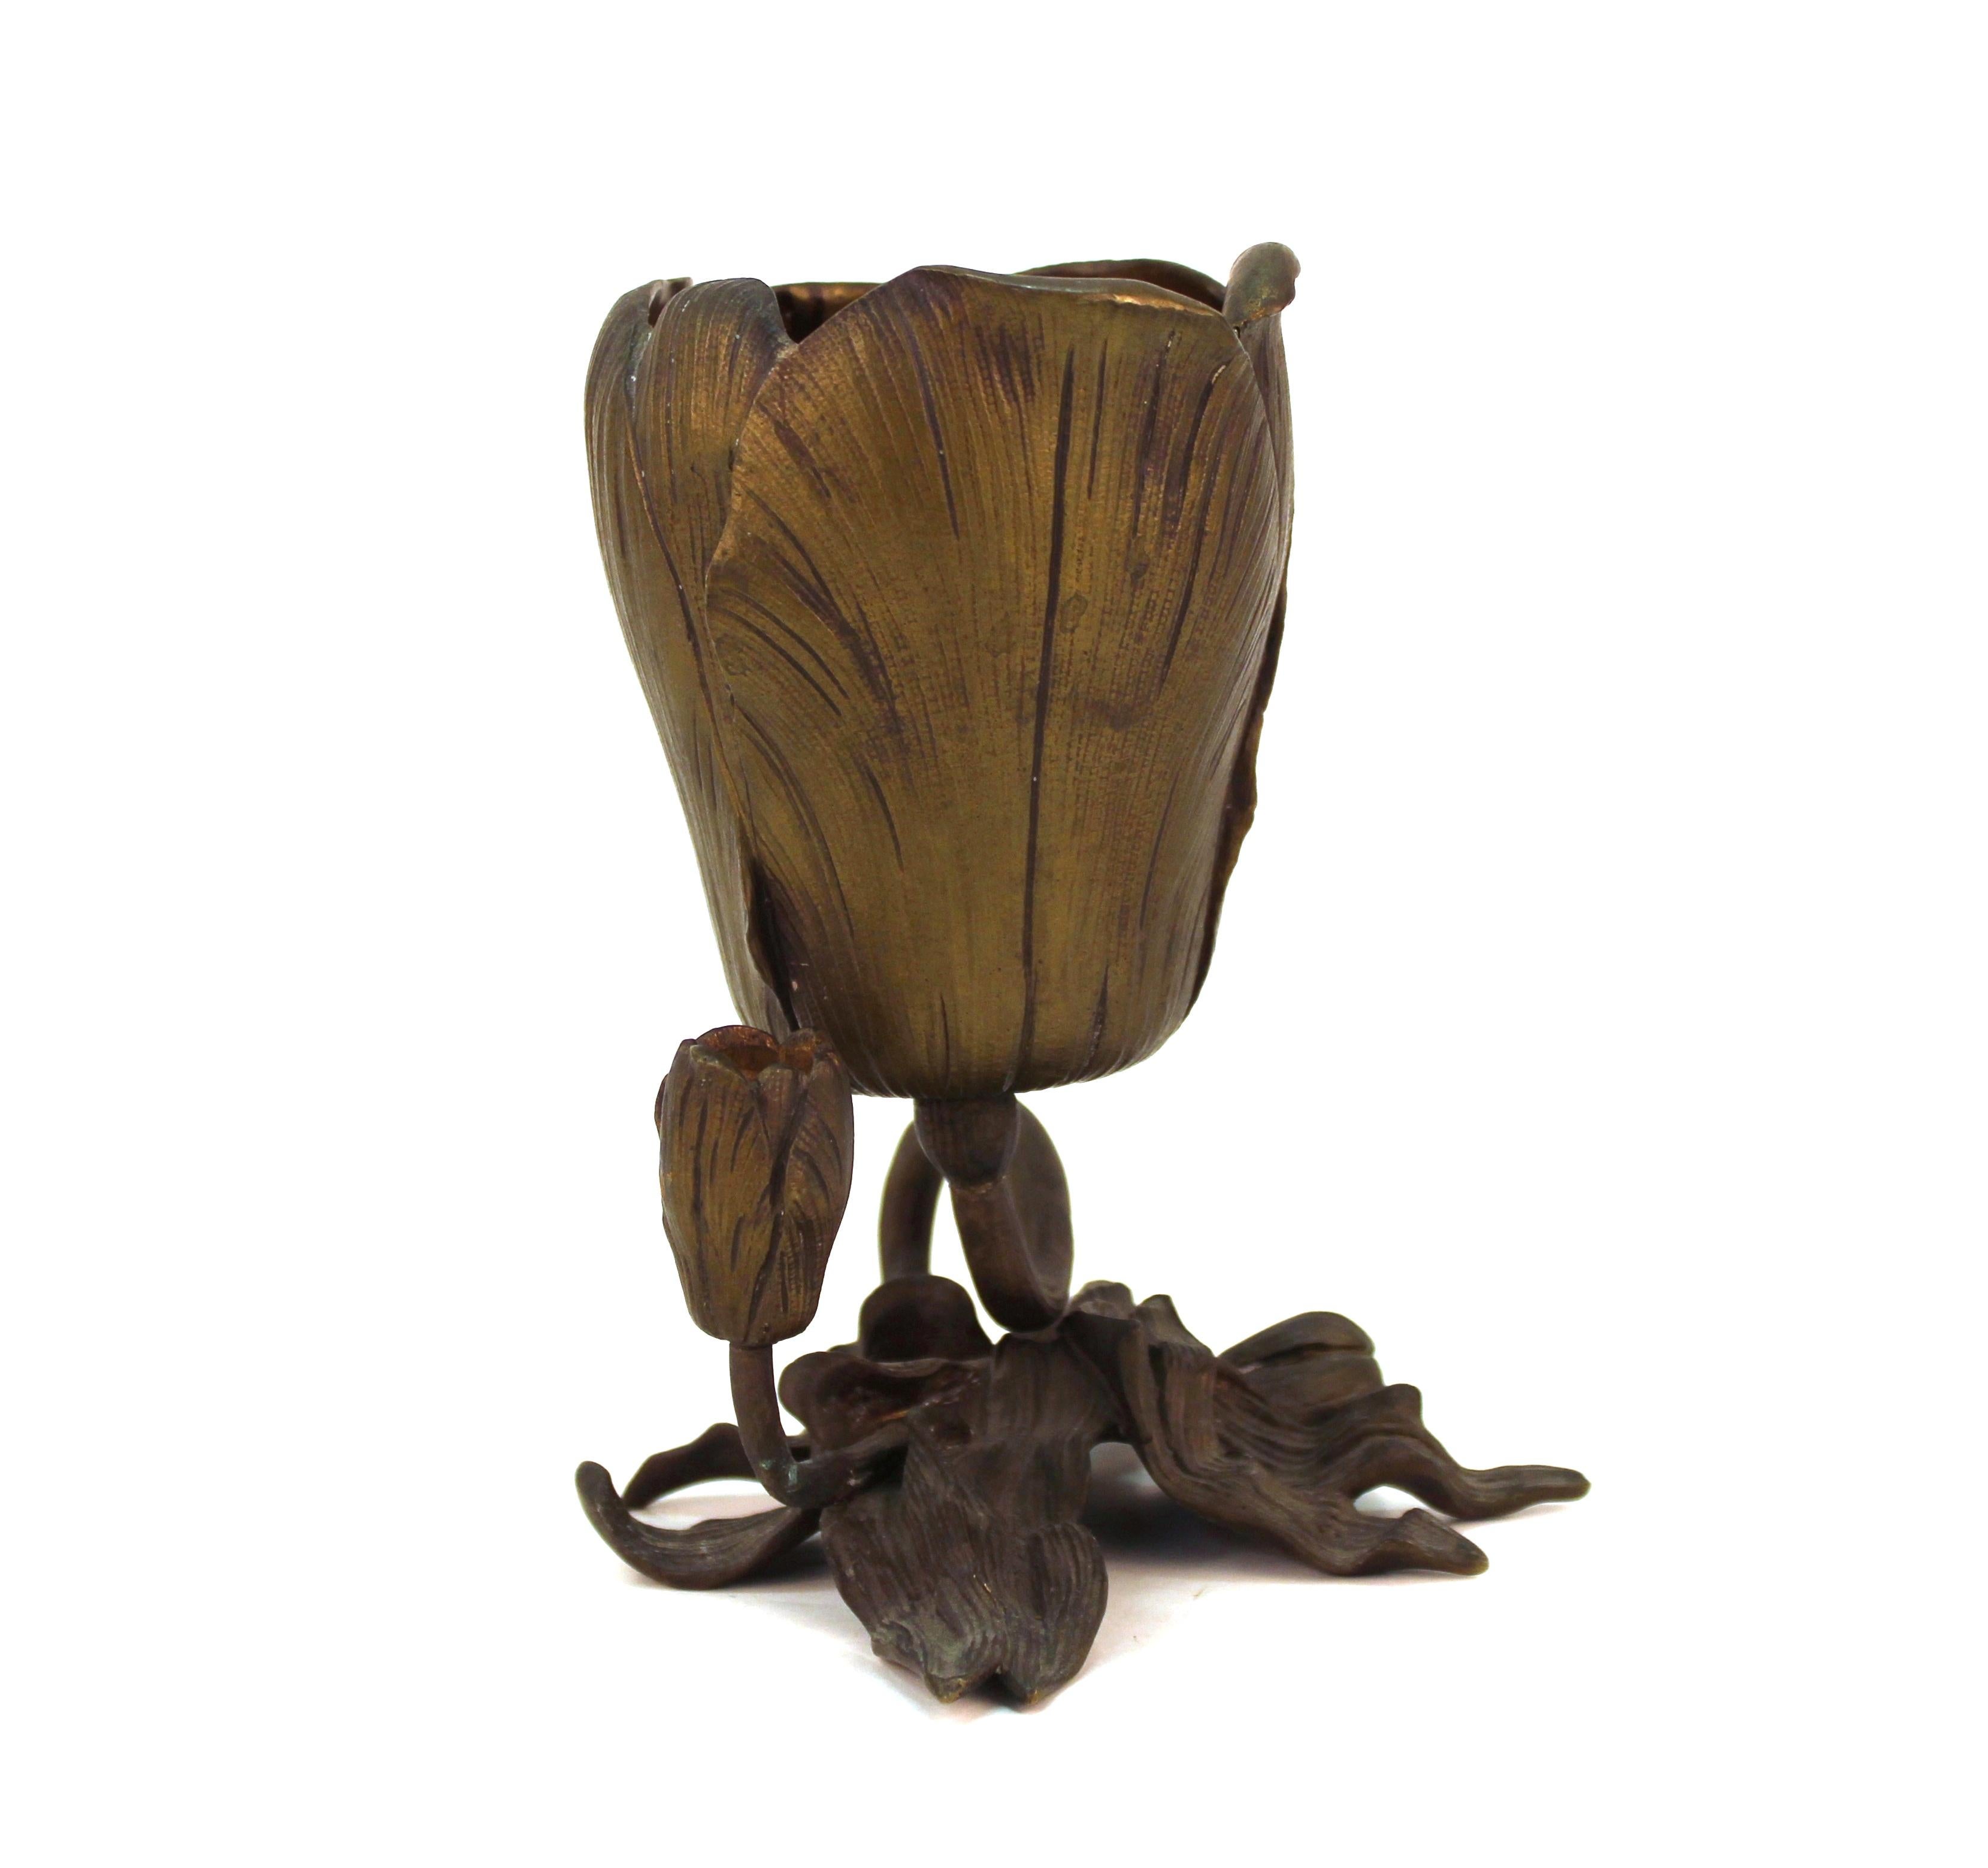 Art Nouveau brown-patinated bronze tulip shaped vase, on a base formed of curving stem, buds and leaves. The piece was likely made during the early 20th century. There is some minor patination loss at the contact points of the bottom.